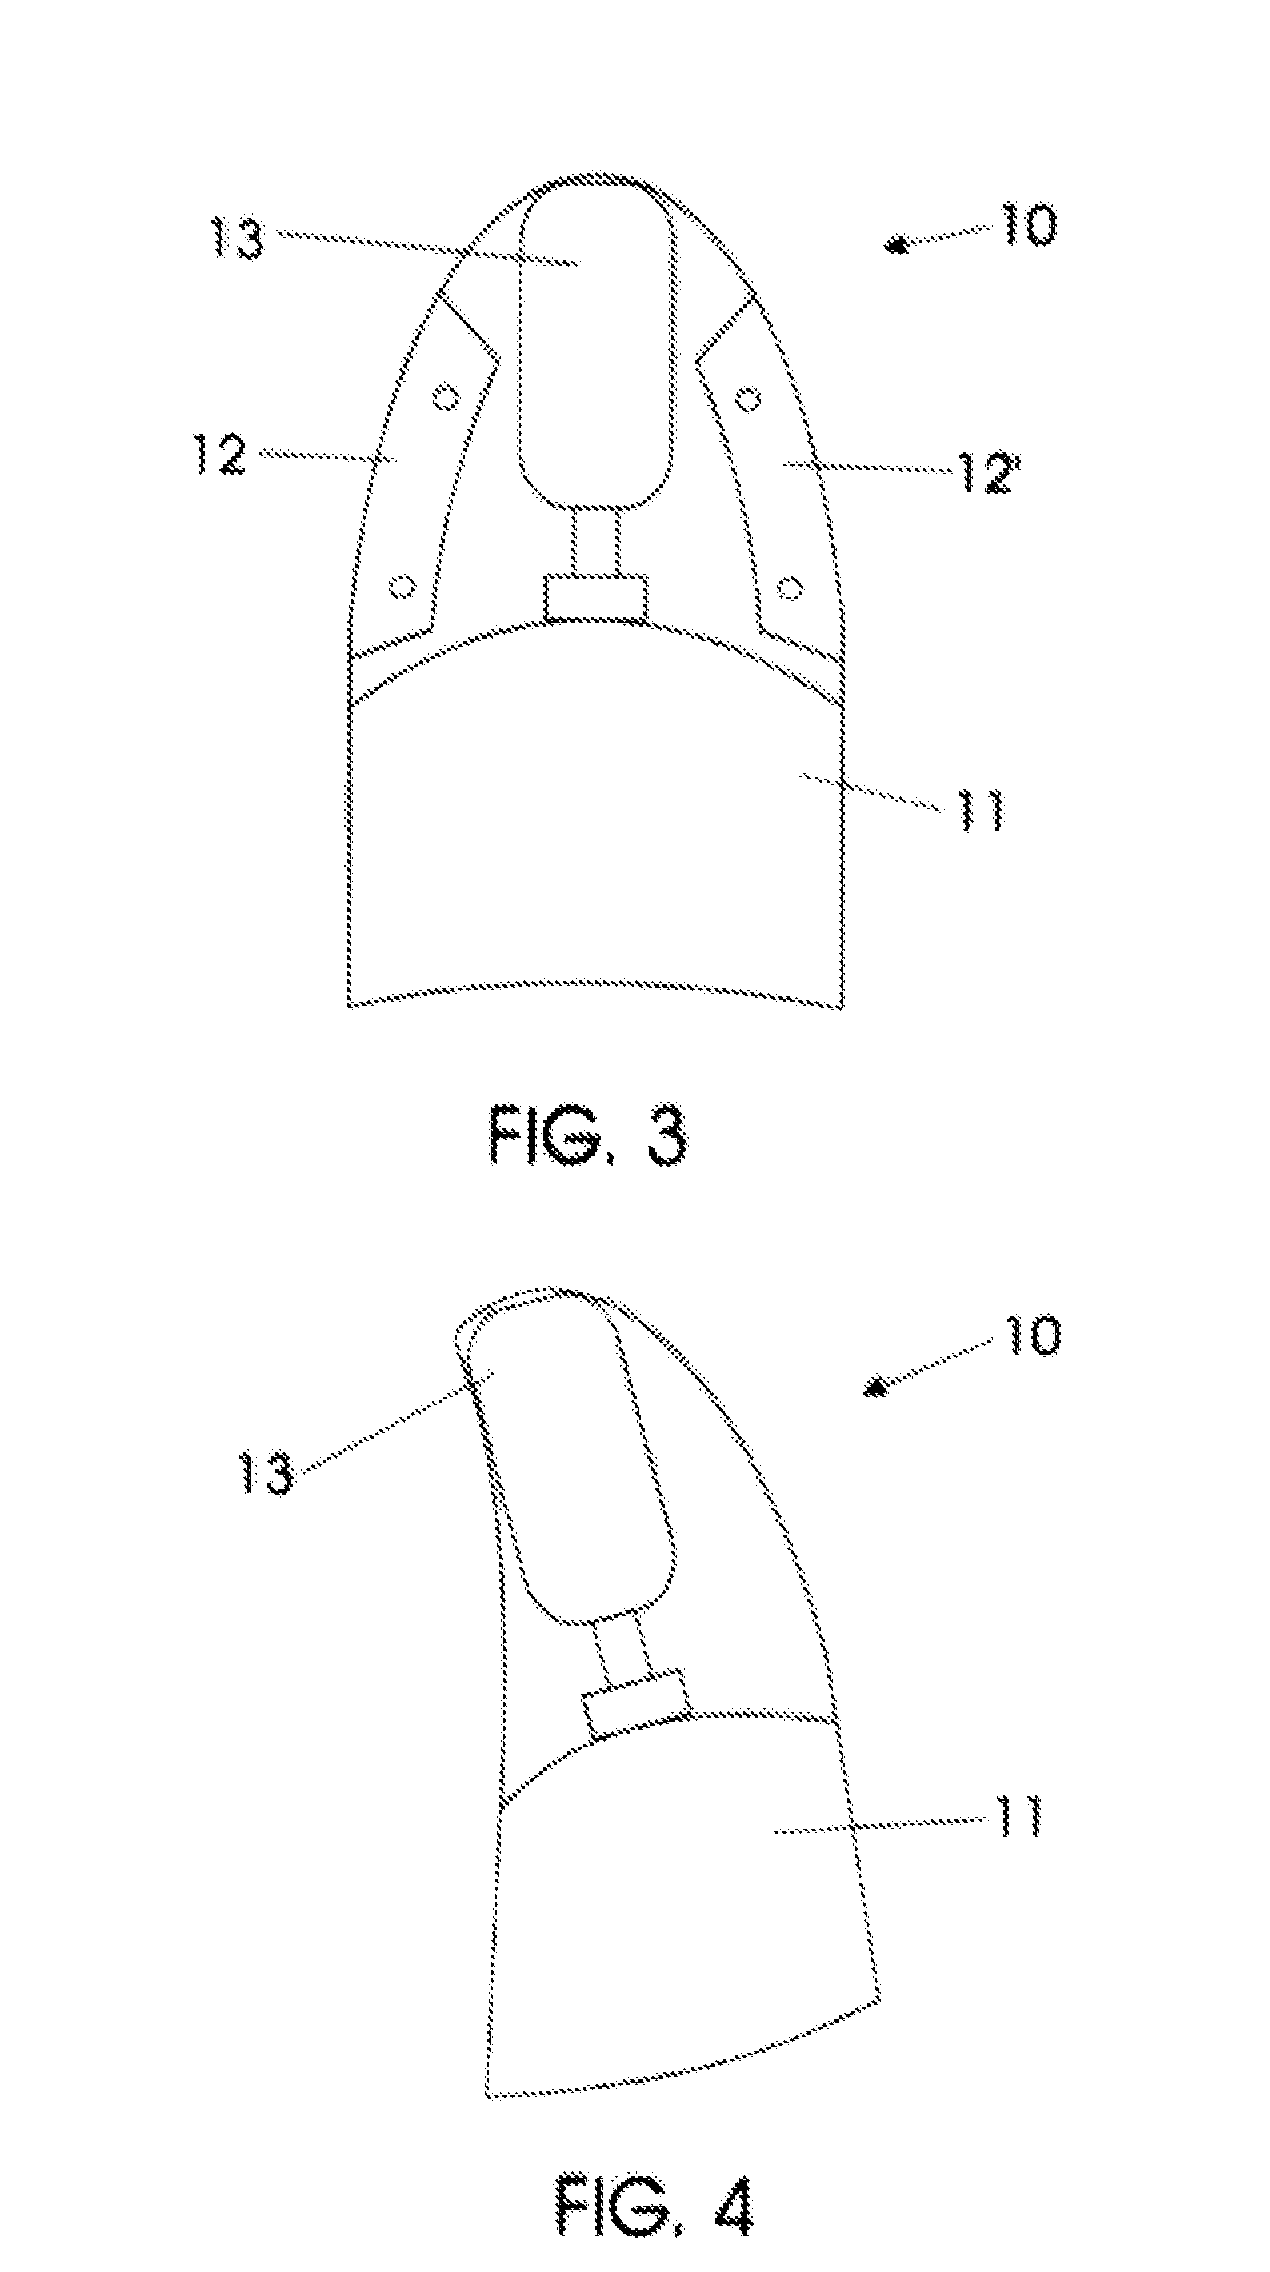 Airbag Module For Protection Of The Cervicodorsal Region